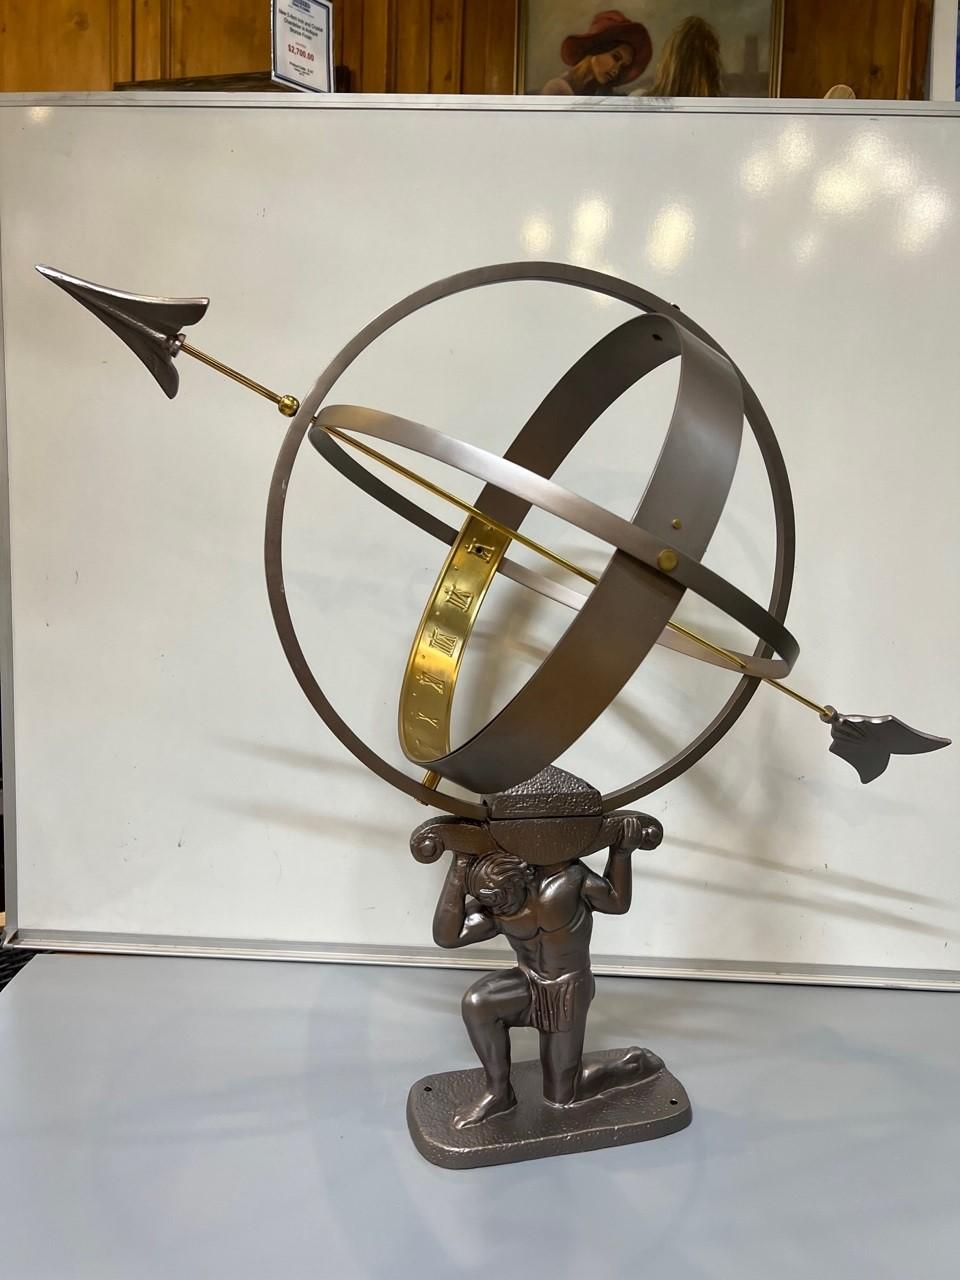 The Greeks have used sundials to measure time since 100 B.C. Reminiscent of classic Greek mythology, this Atlas Armillary Sundial will demand attention, whether placed in your home or garden.
An exquisite and functional work of art, the sphere is